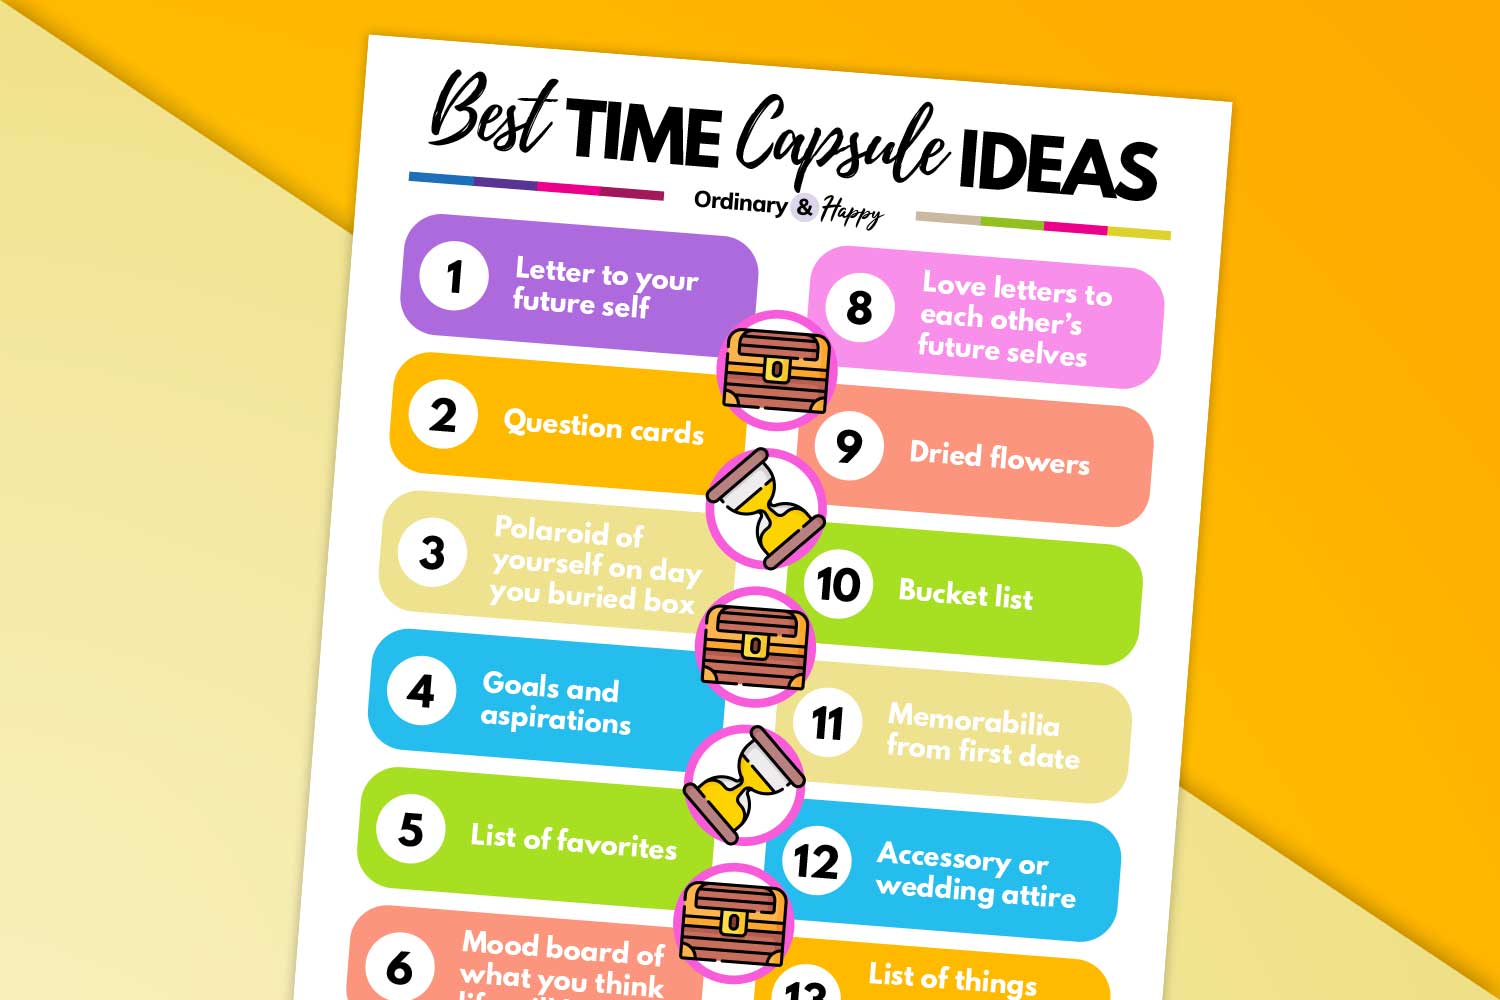 51-time-capsule-ideas-best-things-to-put-in-a-time-capsule-ordinary